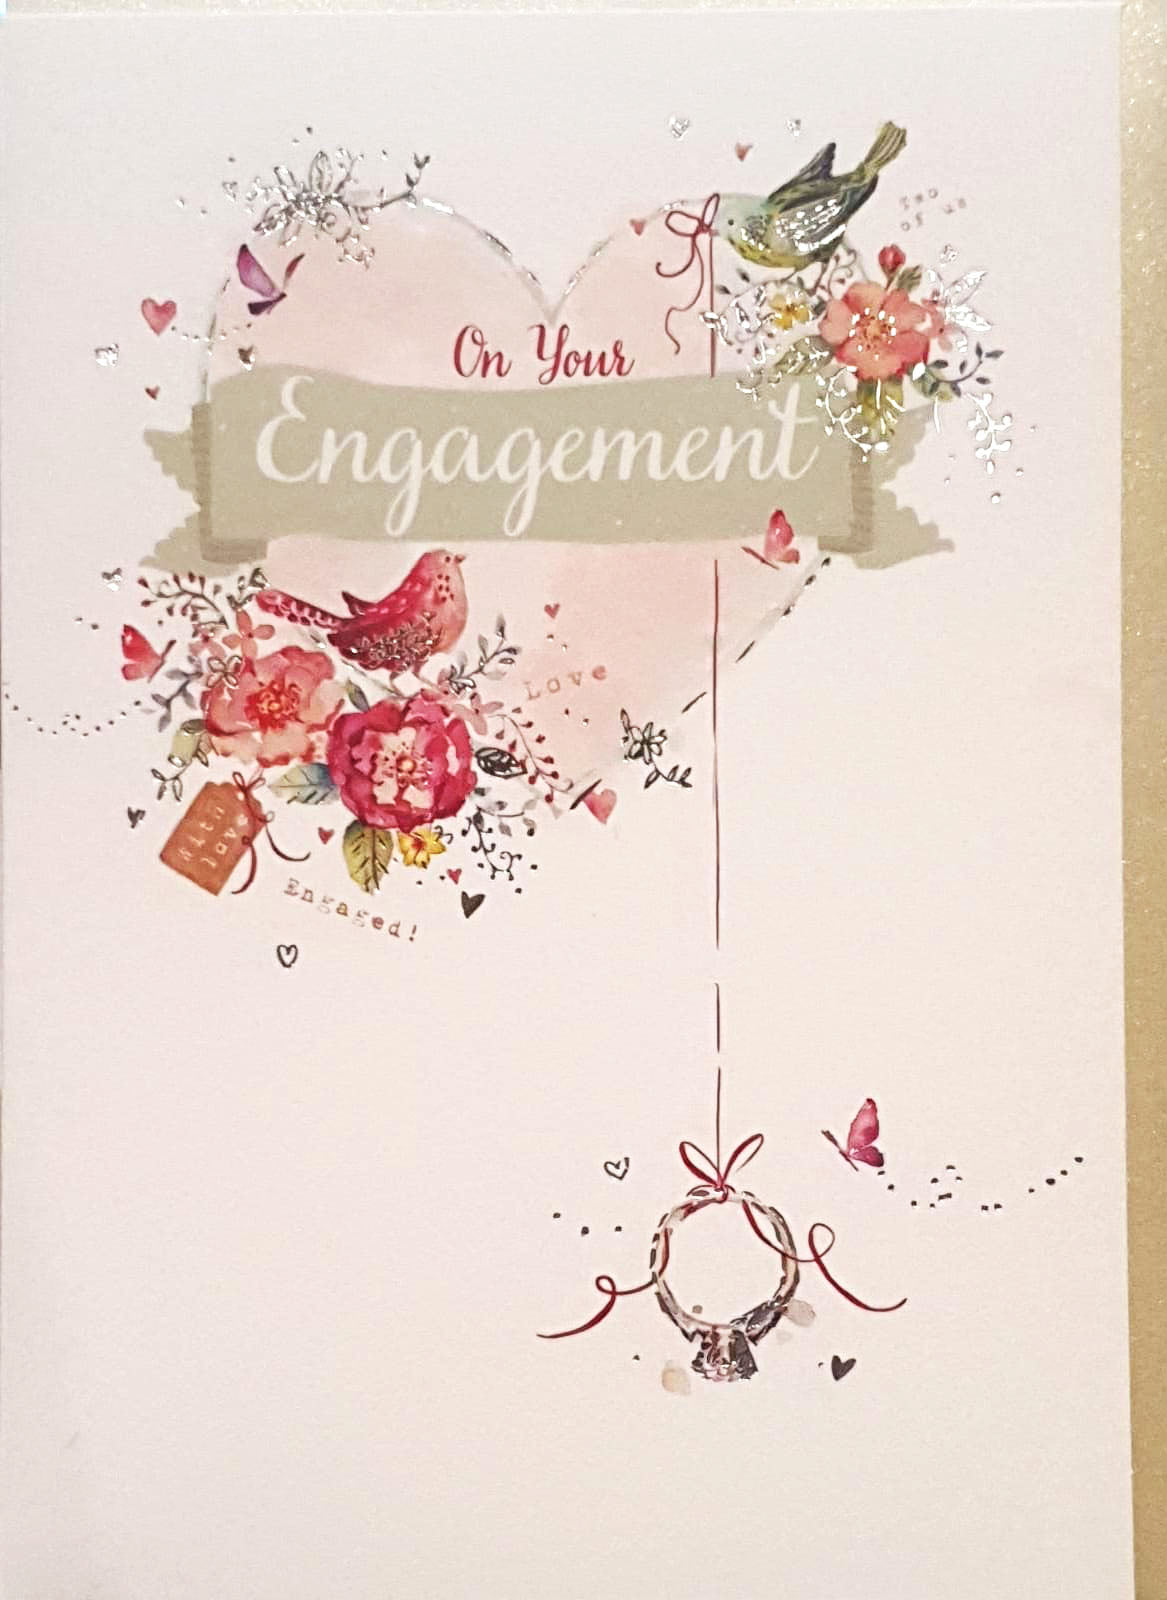 Engagement Card - "Love is In The Air"